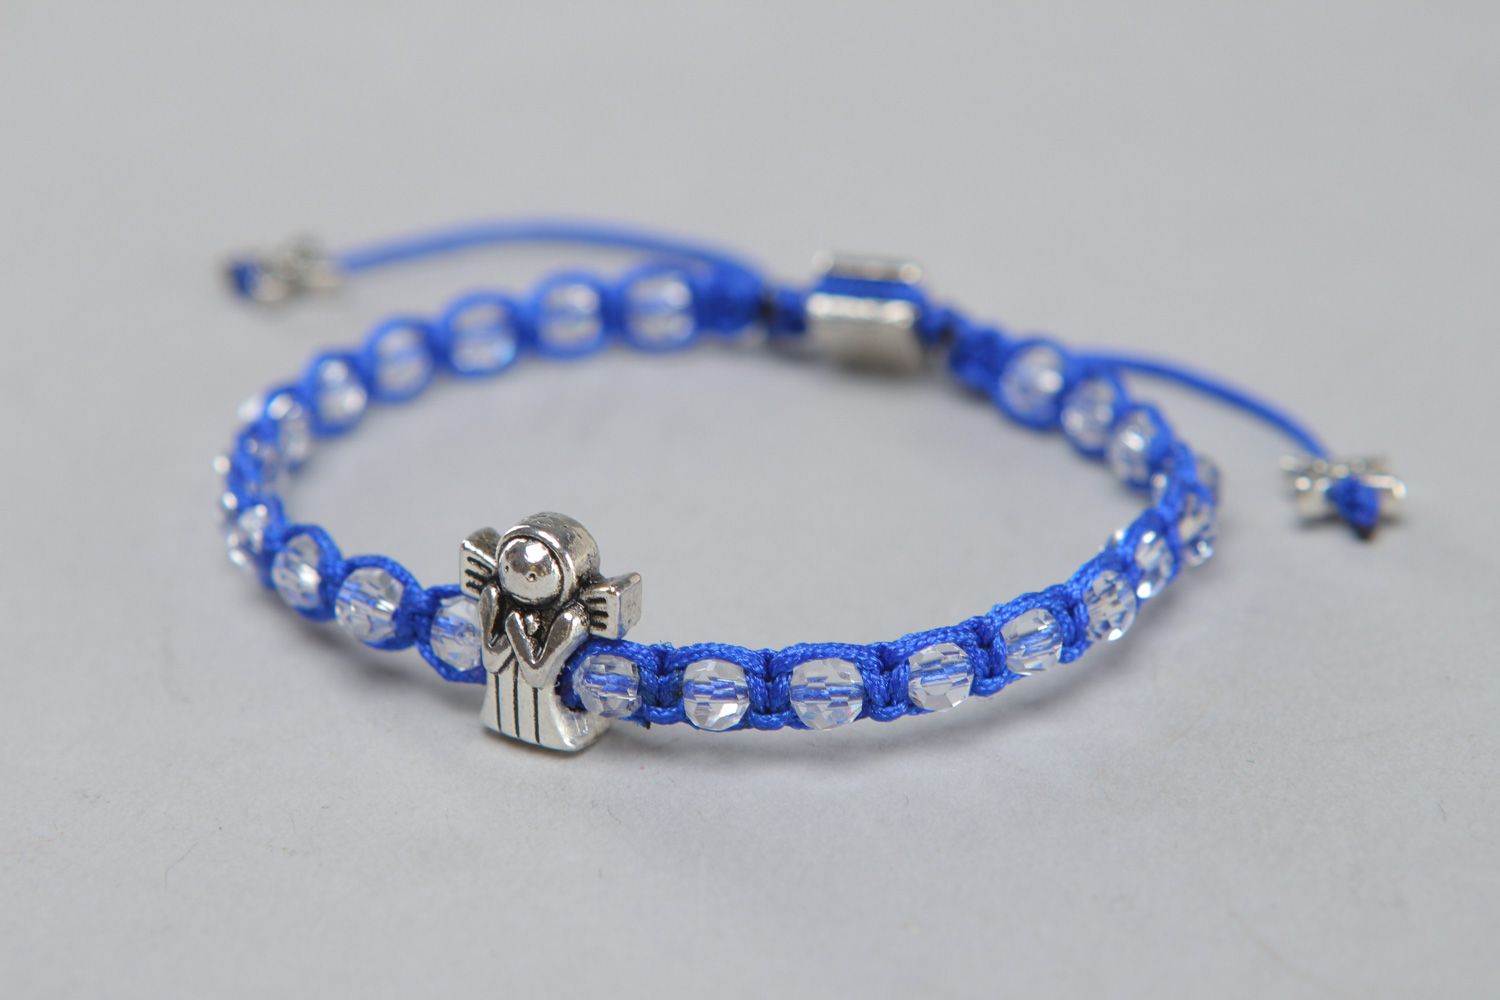 Handmade friendship wrist bracelet woven of blue cord with beads and metal element photo 2